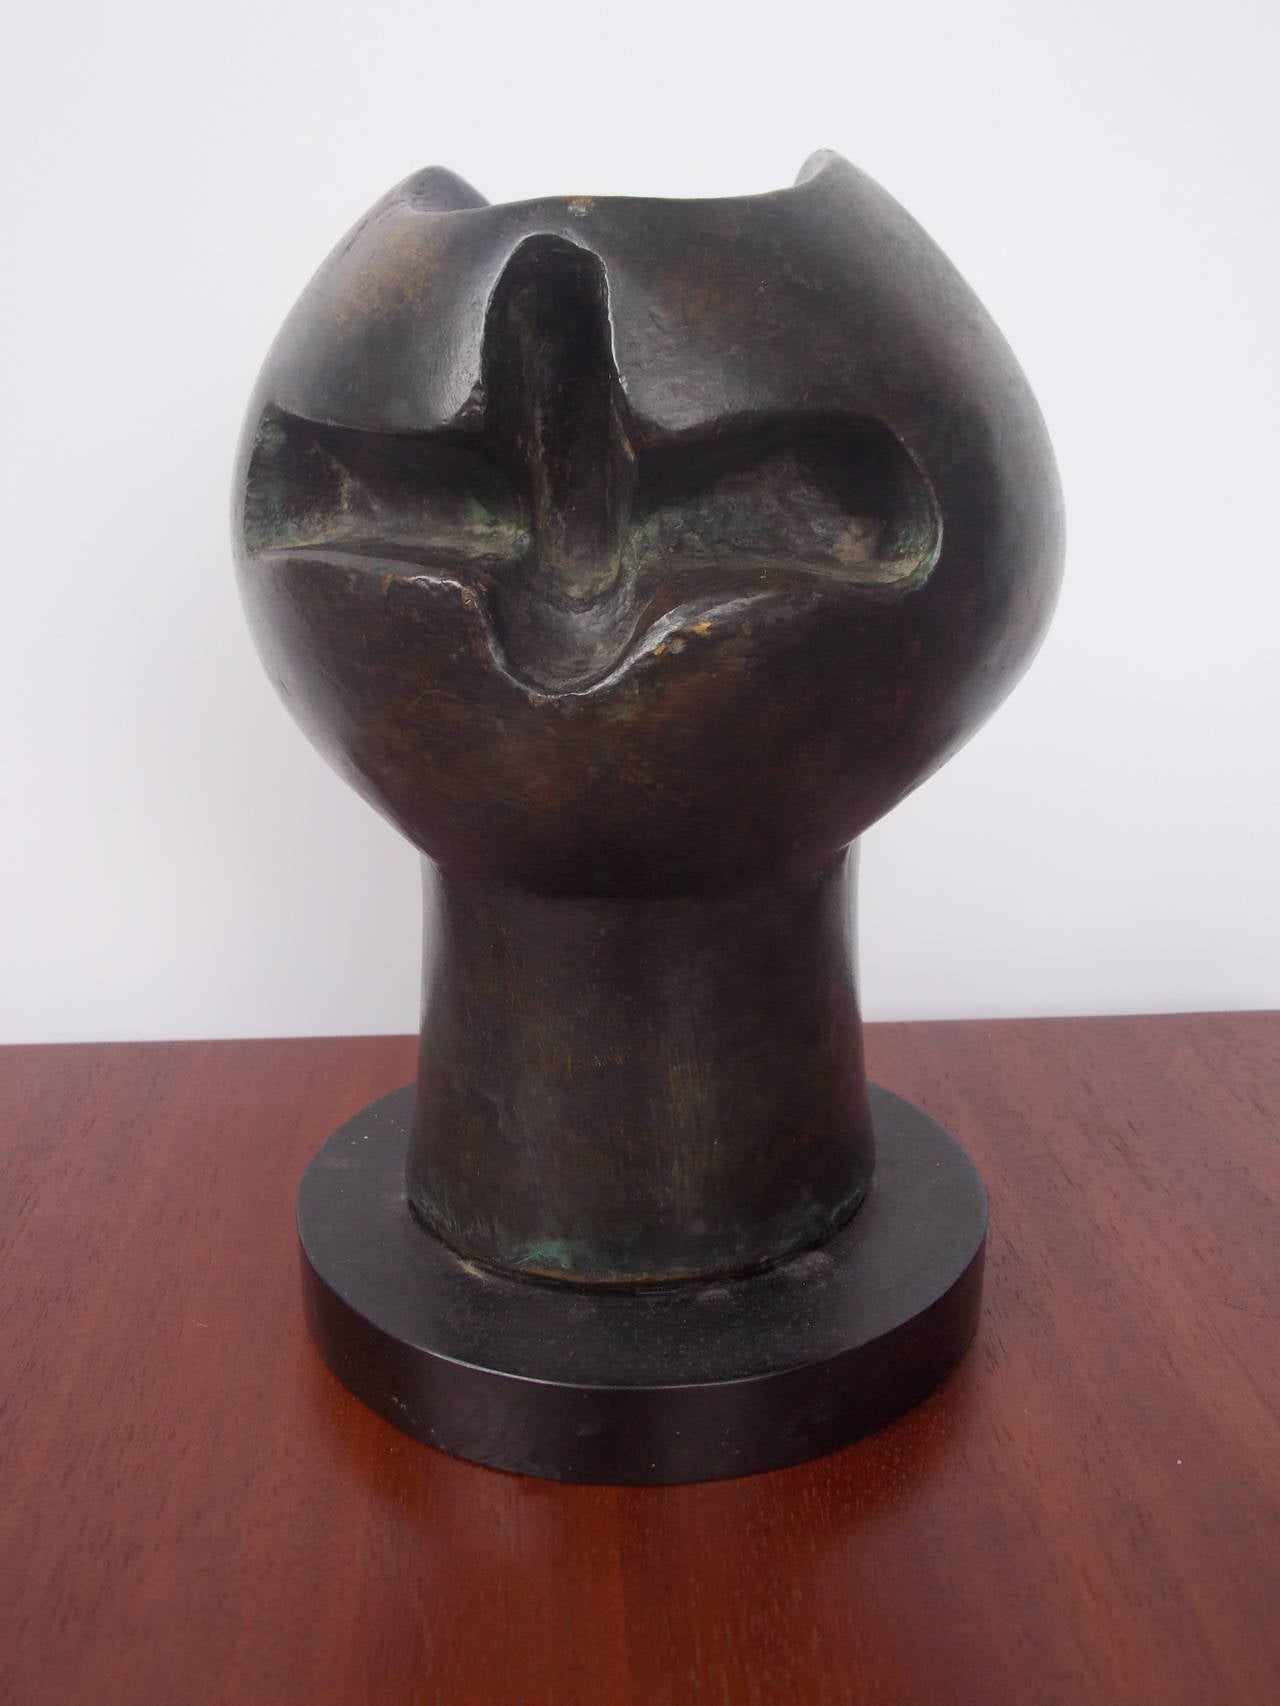 An interesting bronze sculpture on black marble base.
It has remnants of labels. 
It shows patina on the form and ware on the base.
In original condition.